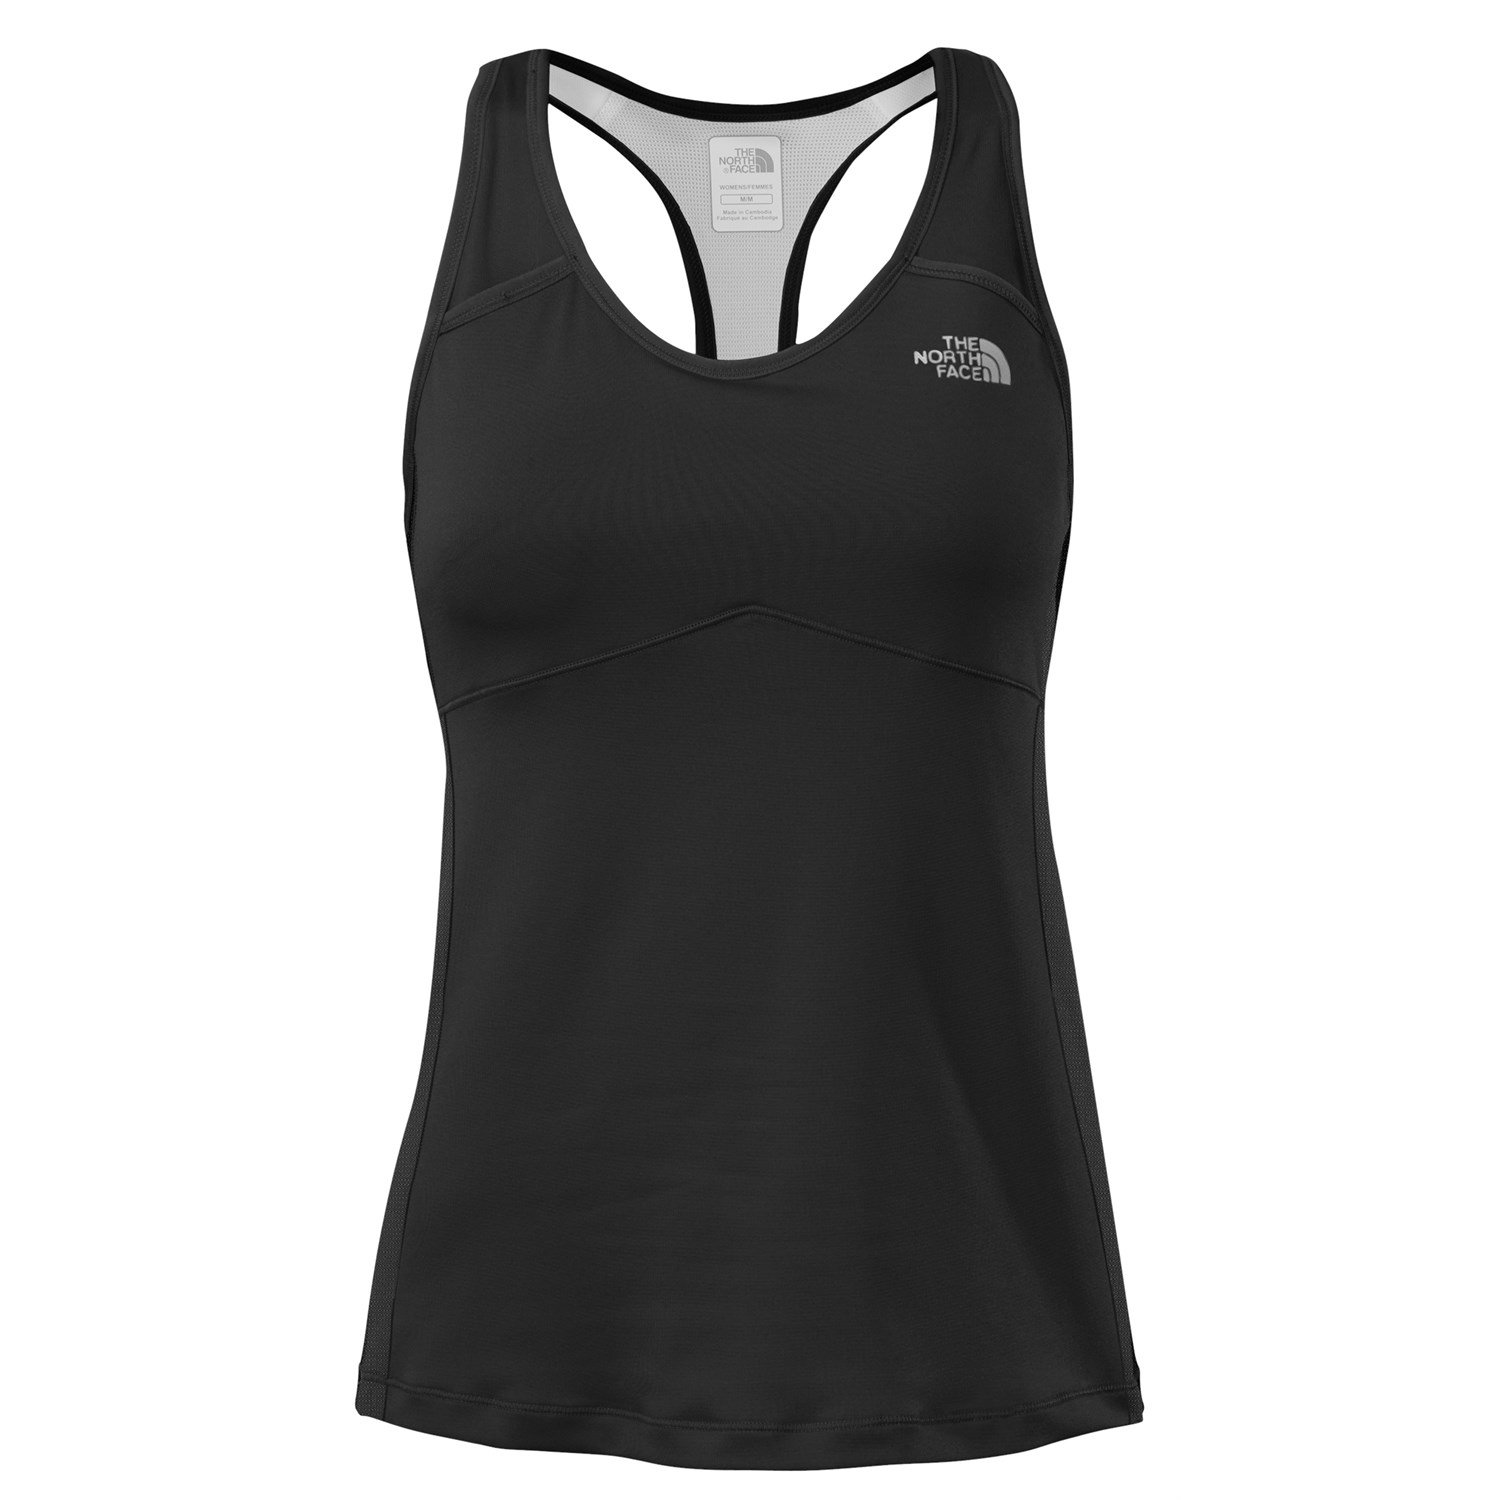 https://images.evo.com/imgp/zoom/84160/371913/the-north-face-eat-my-dust-sport-tank-top-women-s-.jpg